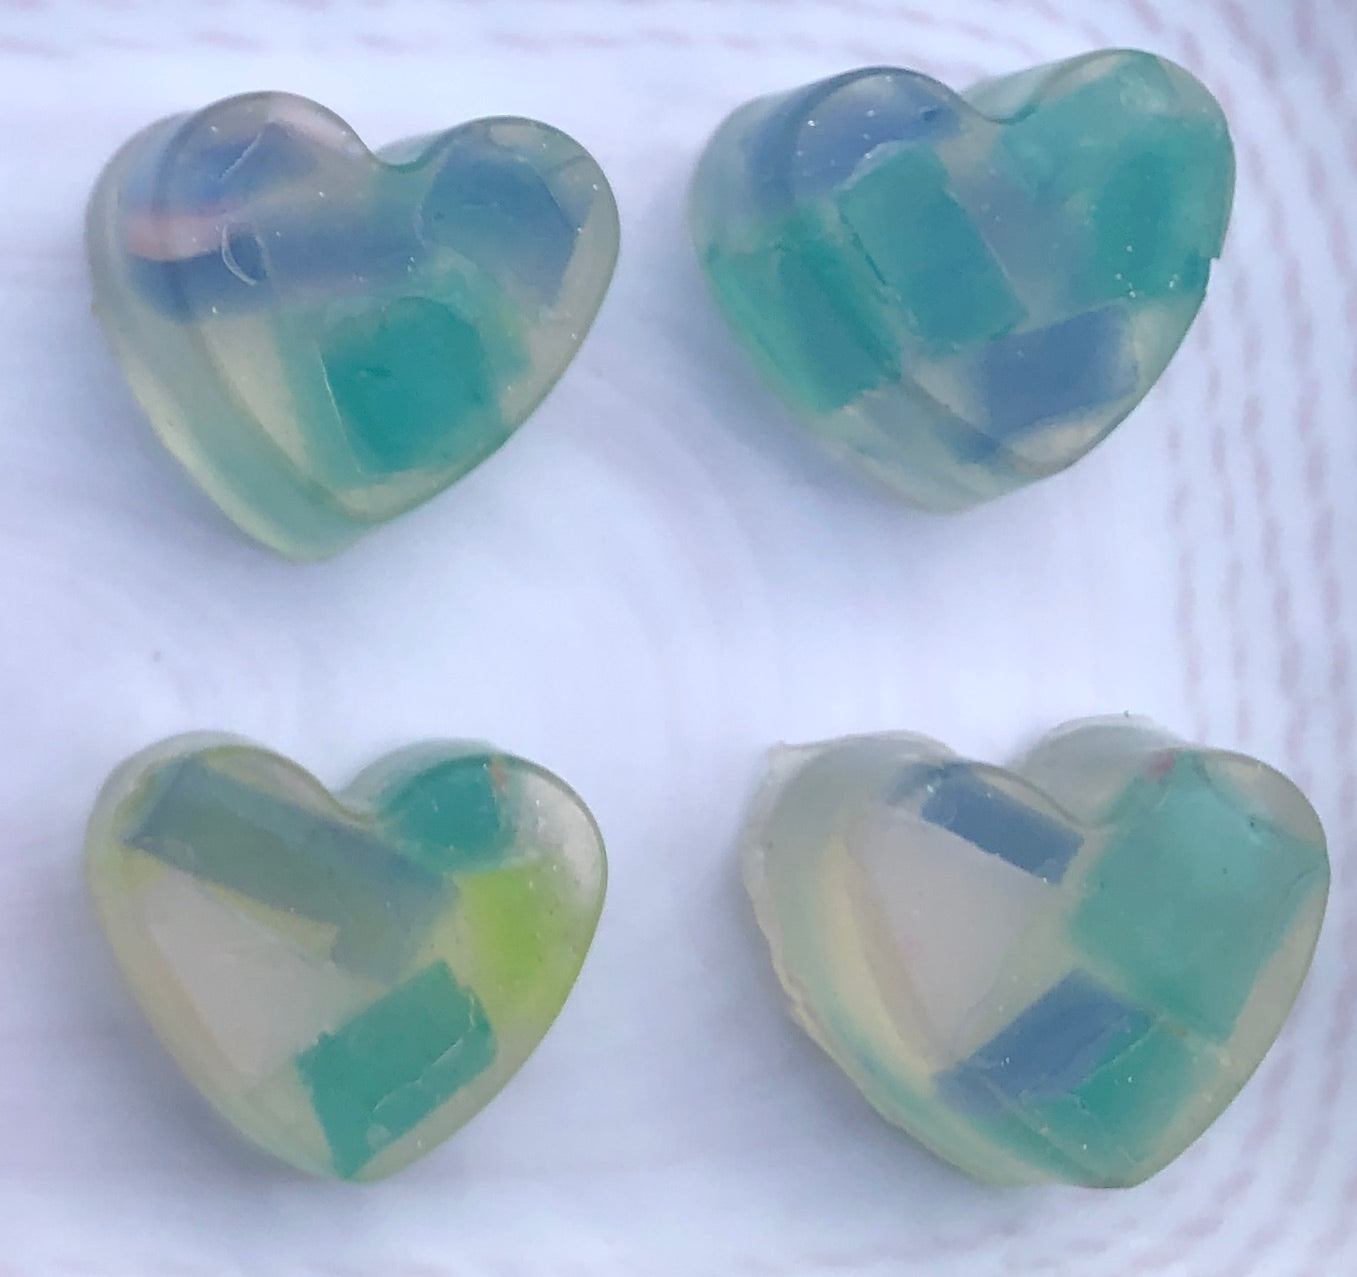 Small festive heart soaps set of 10, Valentine handcrafted glycerin heart soaps, Valentine fillers, Valentine gifts.